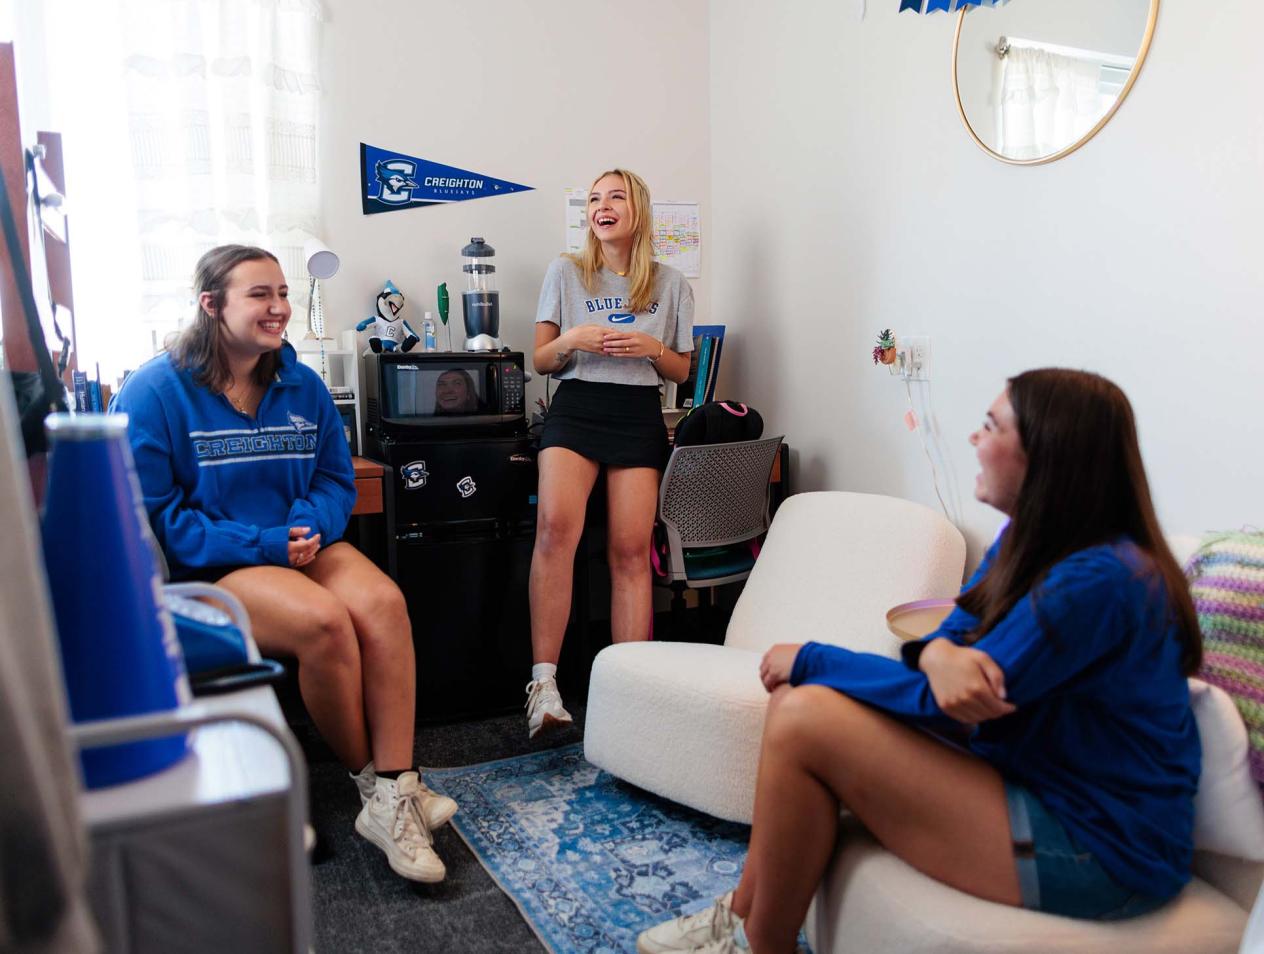 Students smiling in their residence hall room.